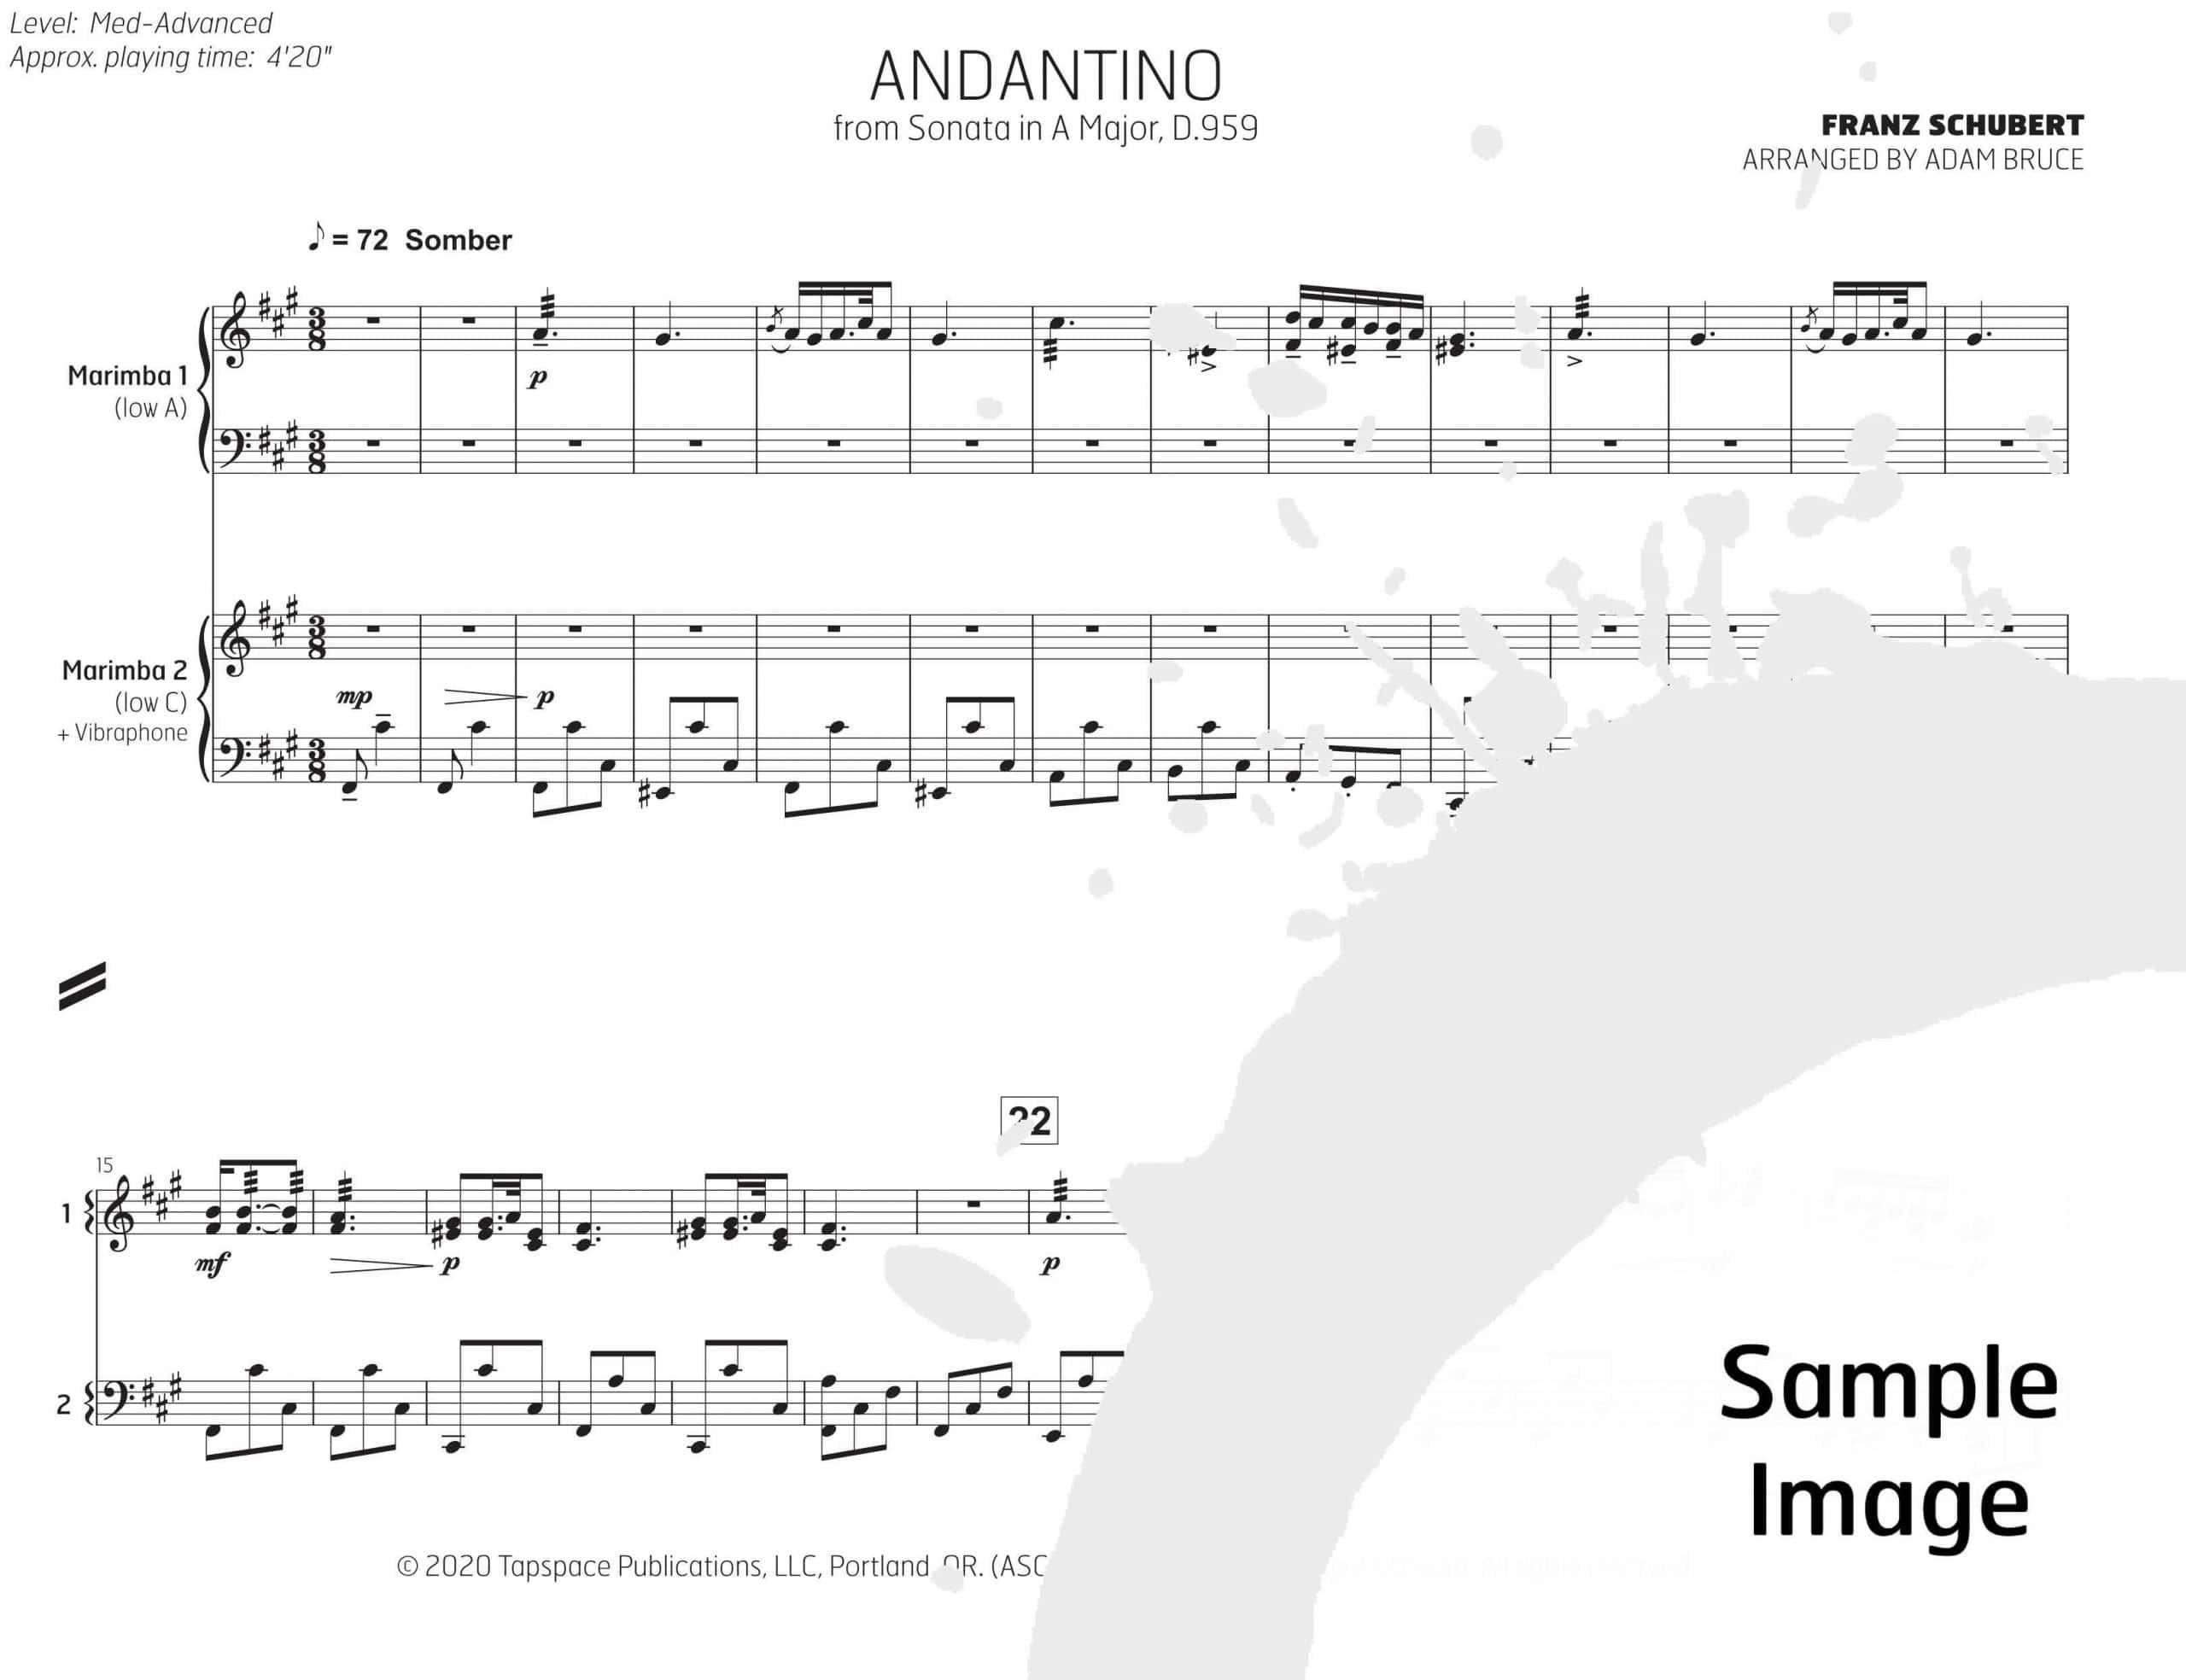 Andantino from Sonata in A Major D959 by Schubert arr. Adam Bruce